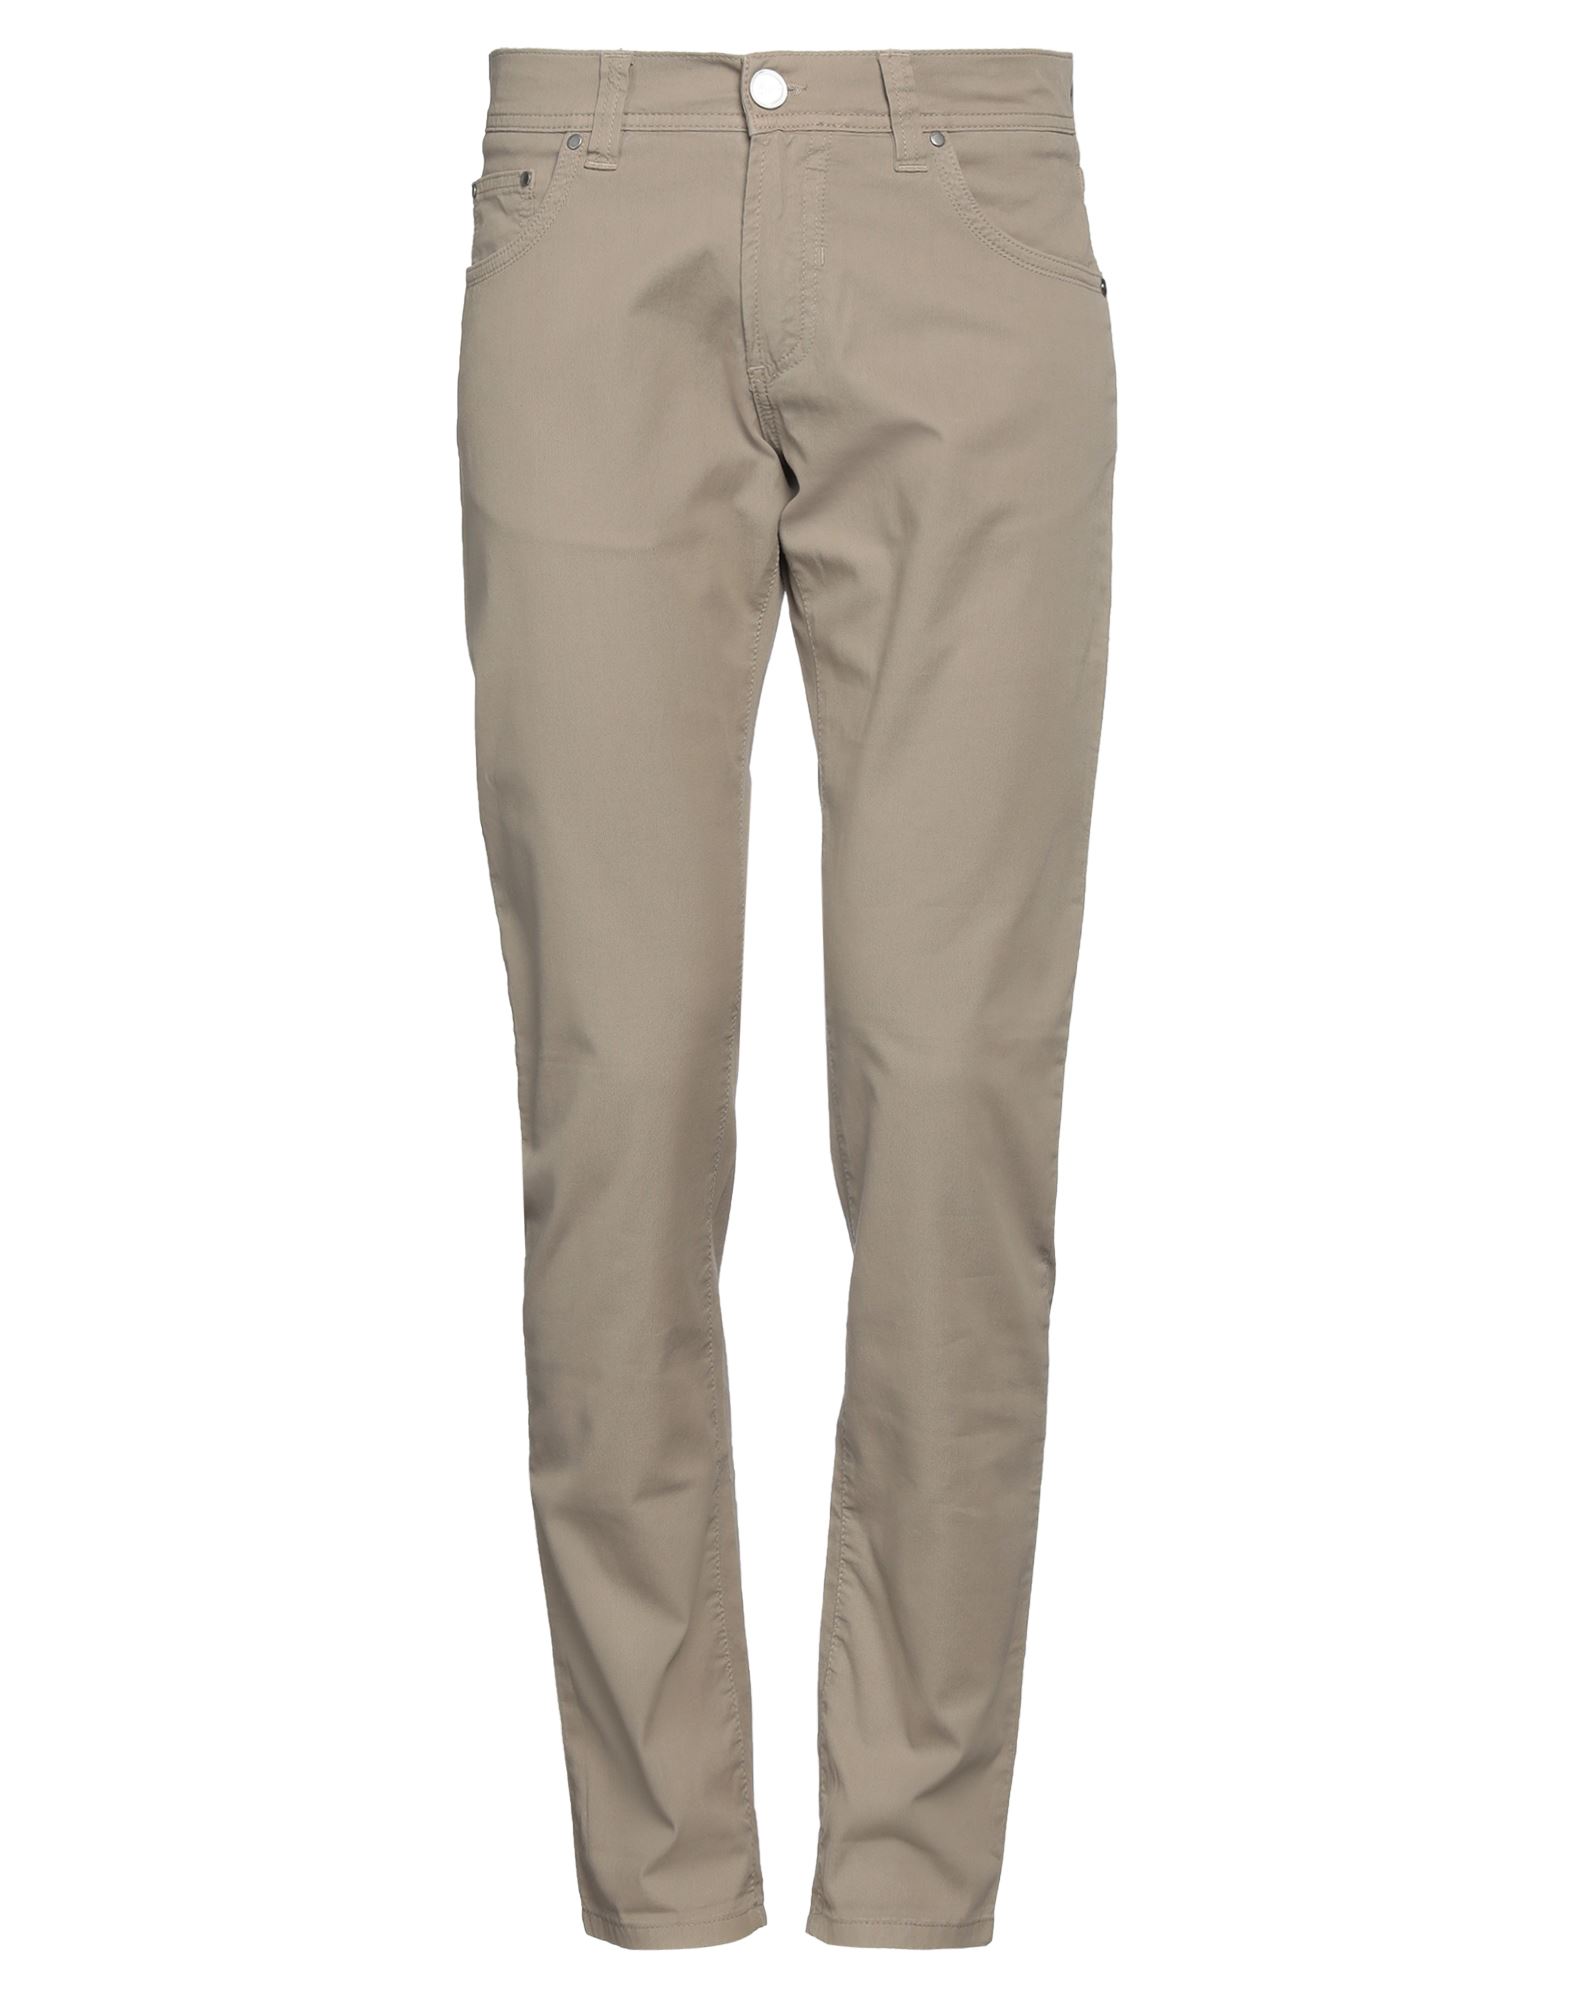 Nicwave Pants In Sand